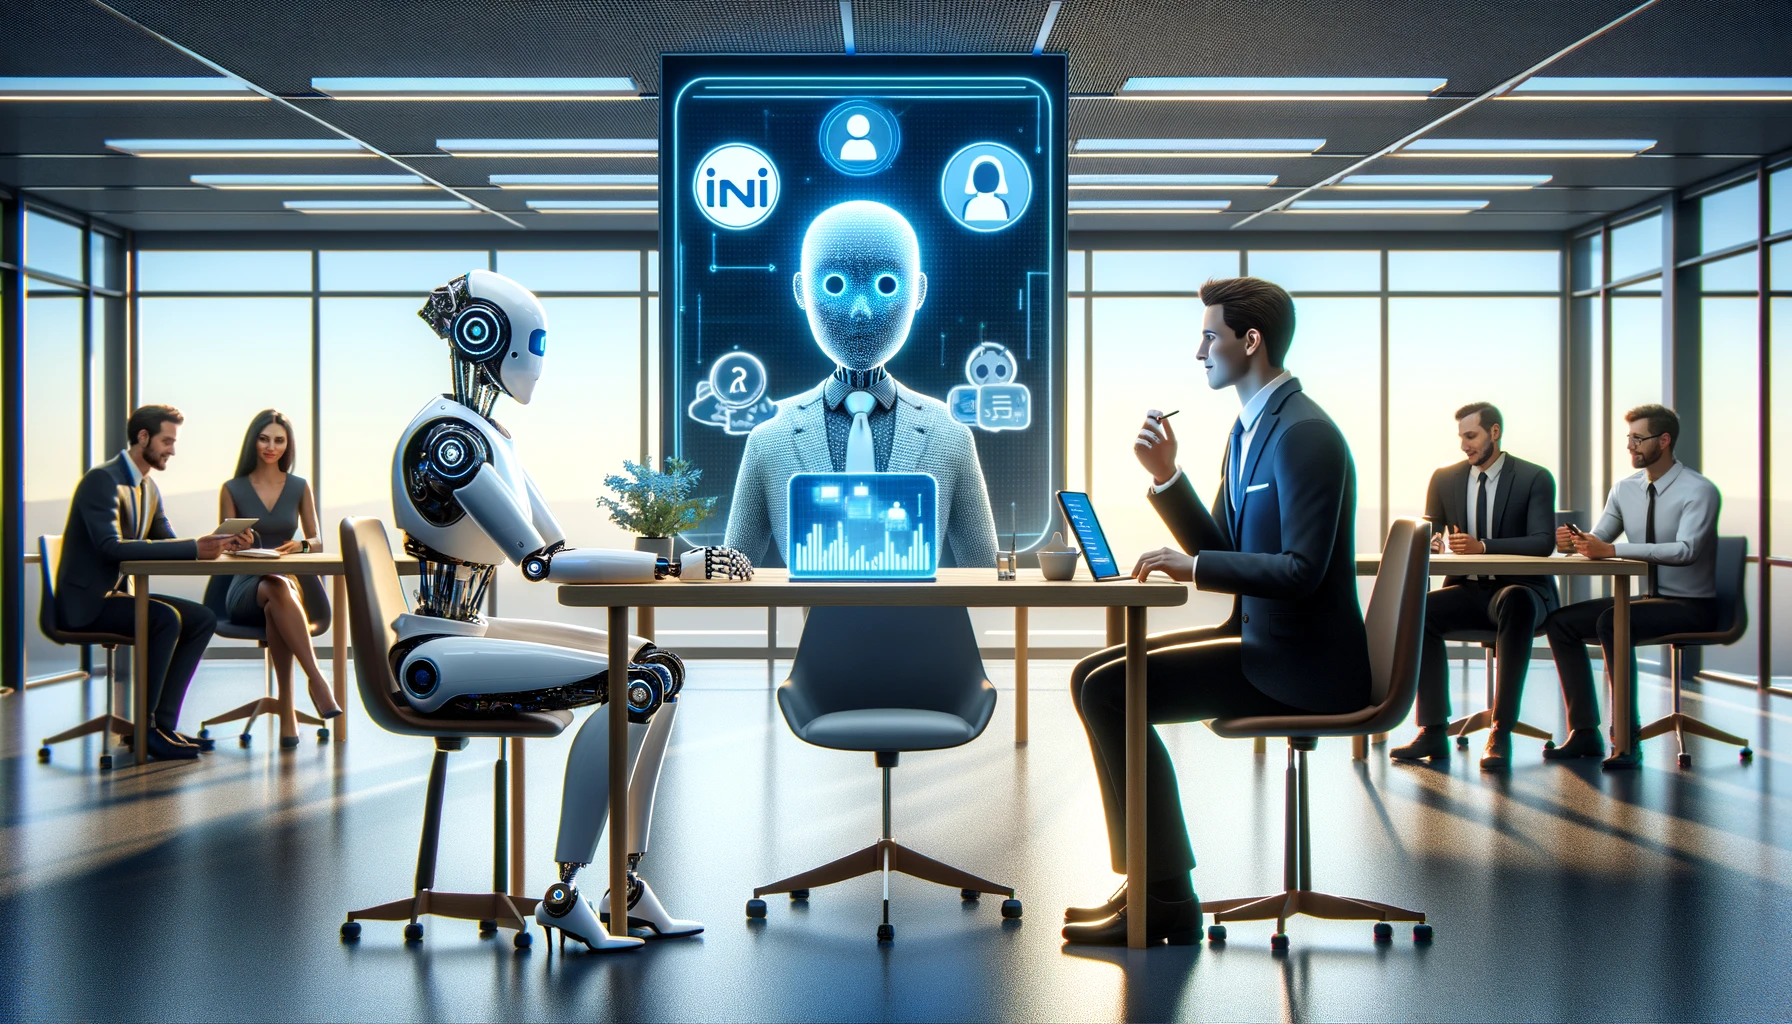  HUMANISING RECRUITMENT IN THE AGE OF AI - Striking the Balance Between Automation and Empathy